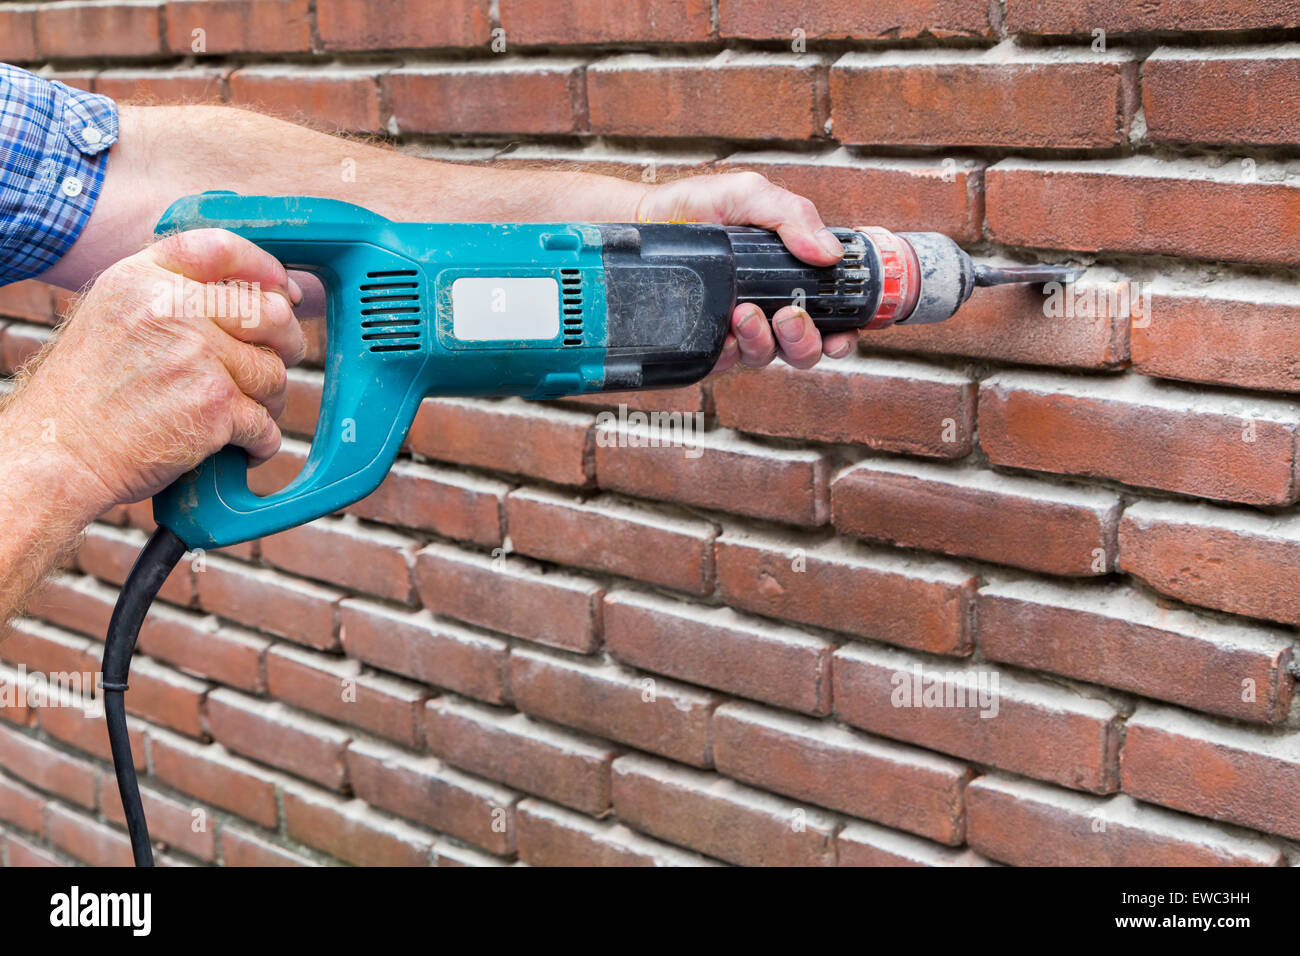 Arms of construction worker holding drilling machine against brick wall Stock Photo